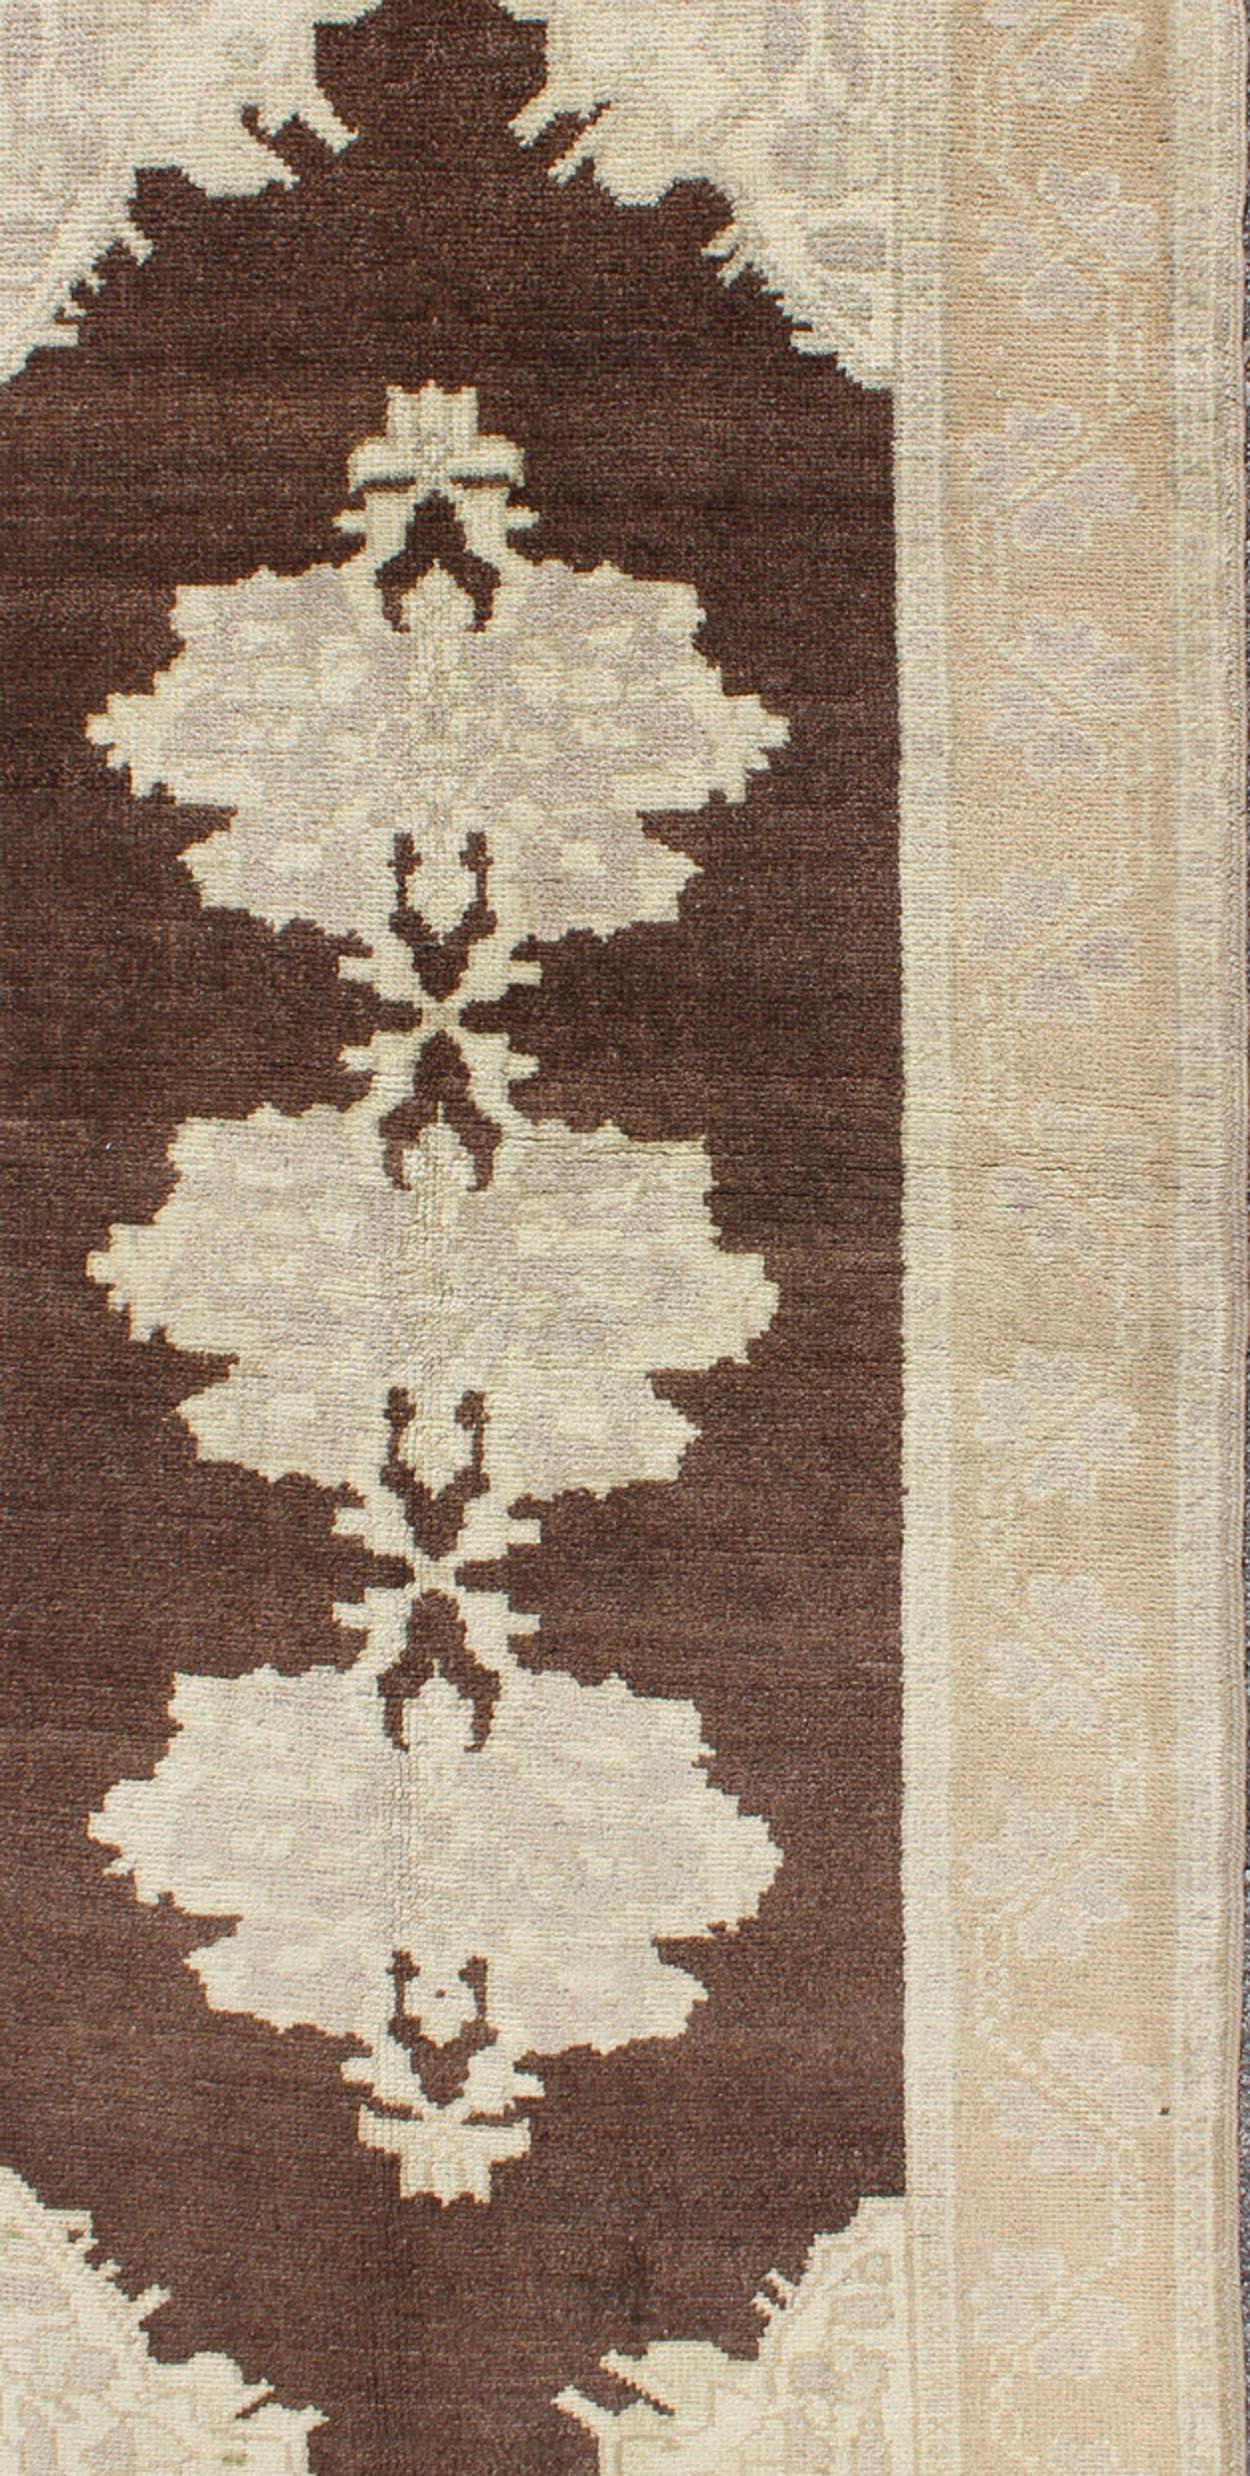 Brown background vintage Turkish Oushak runner with medallions in cream and ivory, rug en-604, country of origin / type: Turkey / Oushak, circa mid-20th century

This beautiful vintage Oushak runner from mid-20th century Turkey features a Classic